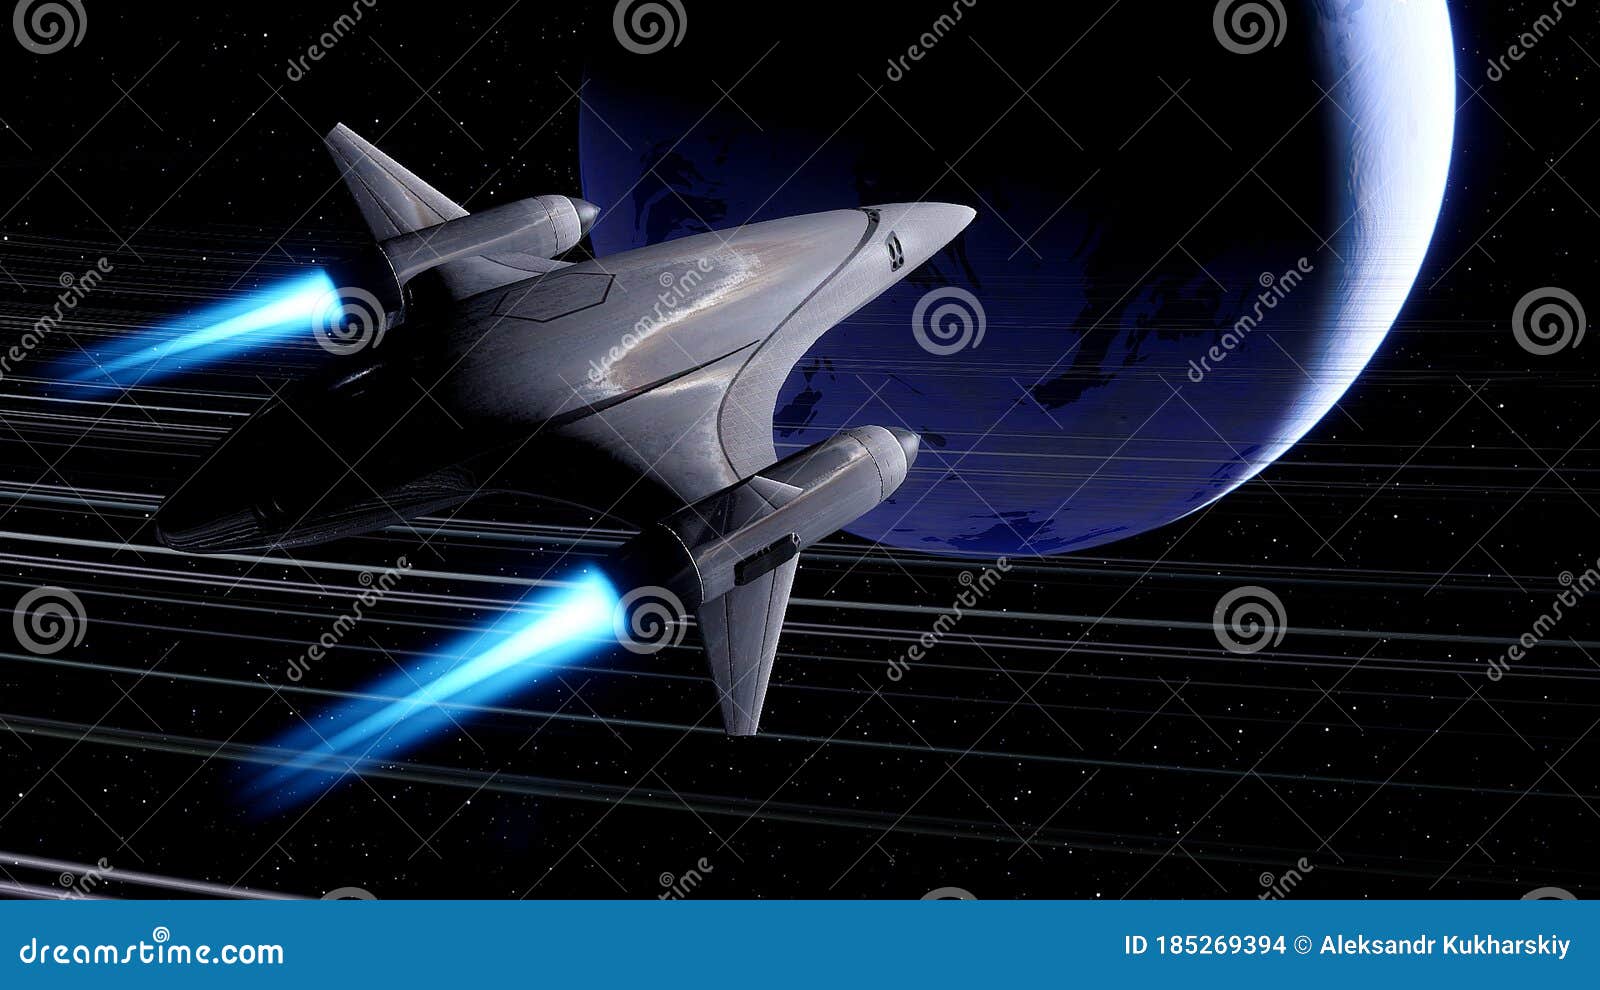 Spaceship Flies Near Exoplanet, Spaceship of the Future in Space, Ufo,  Spaceship in Space 3d Render Stock Illustration - Illustration of ship,  fantasy: 185269394